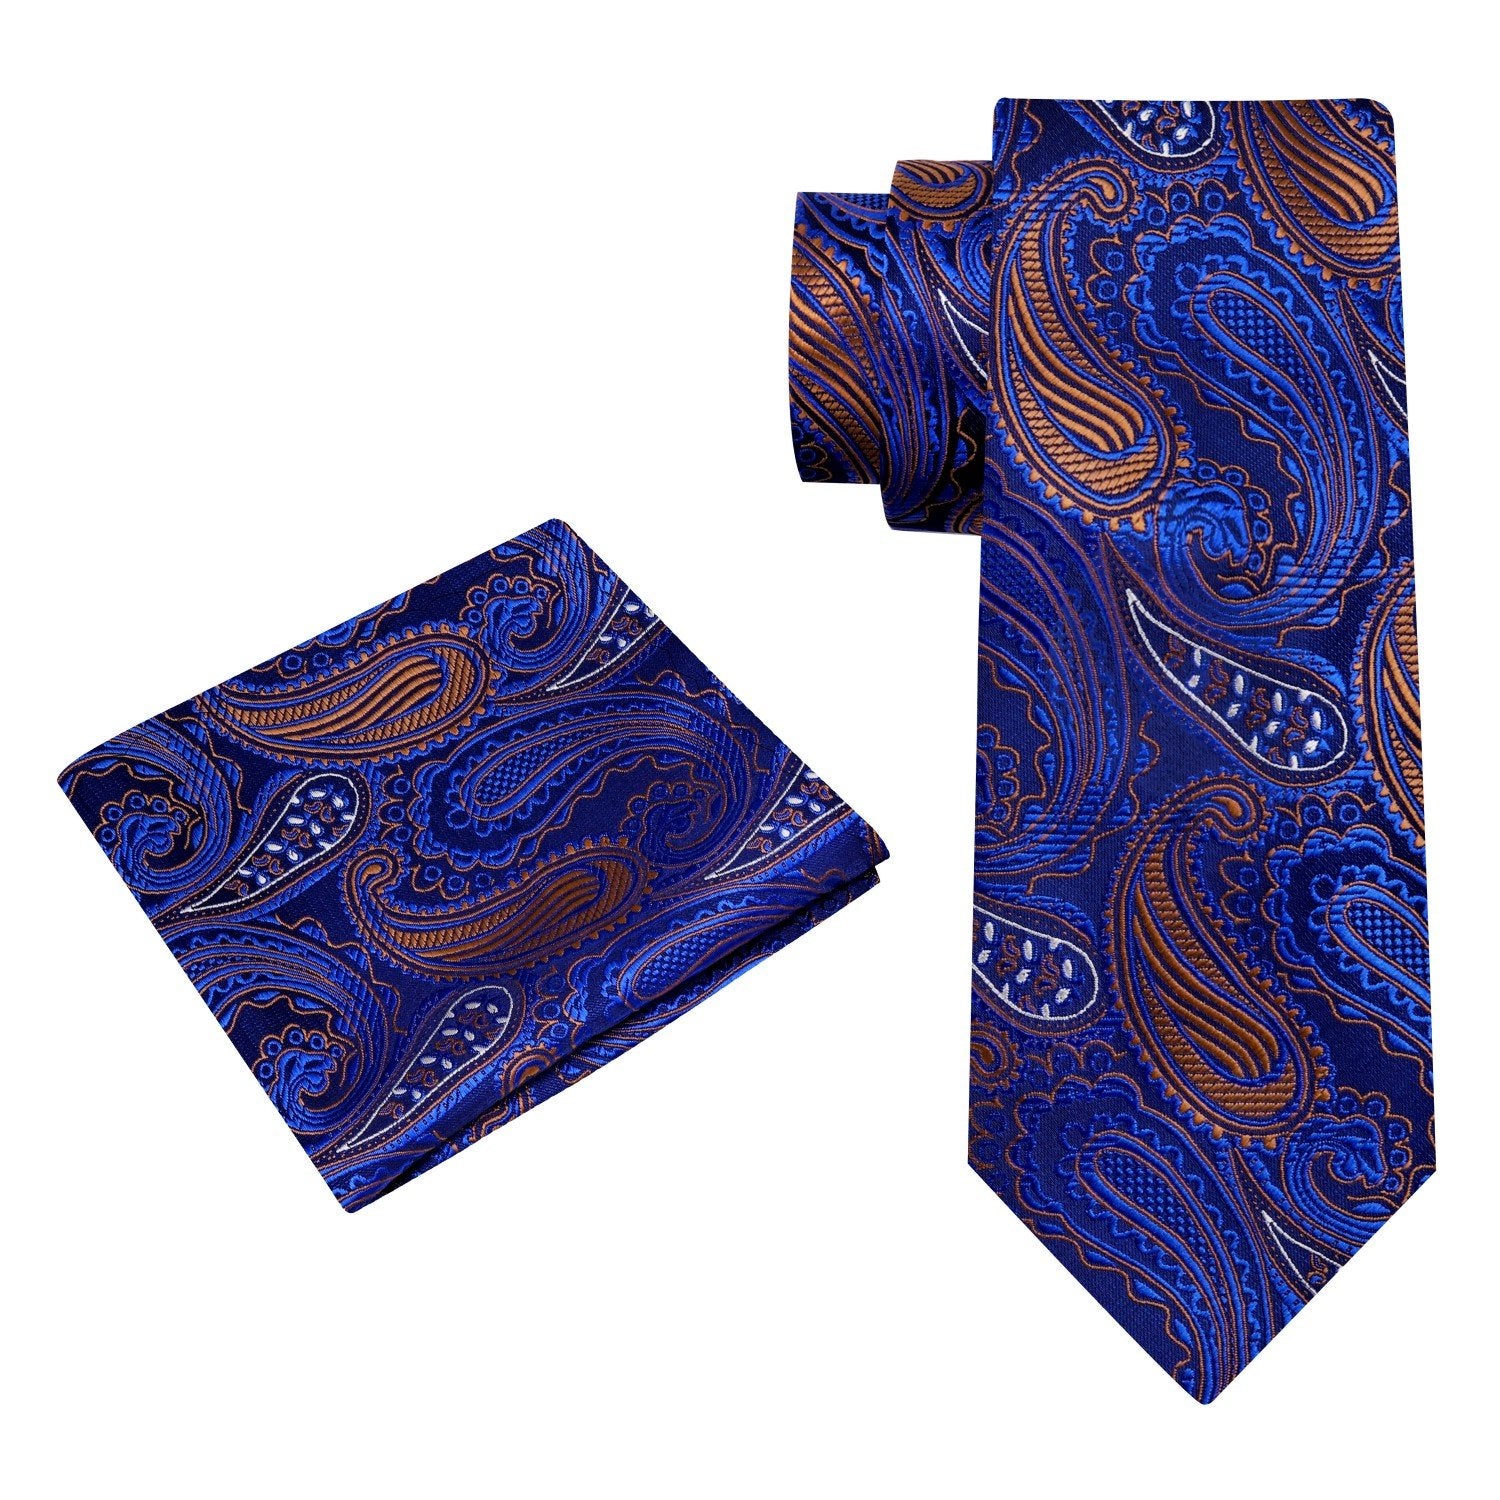 Alt View: Blue, Golden Brown, Black Paisley Tie and Square